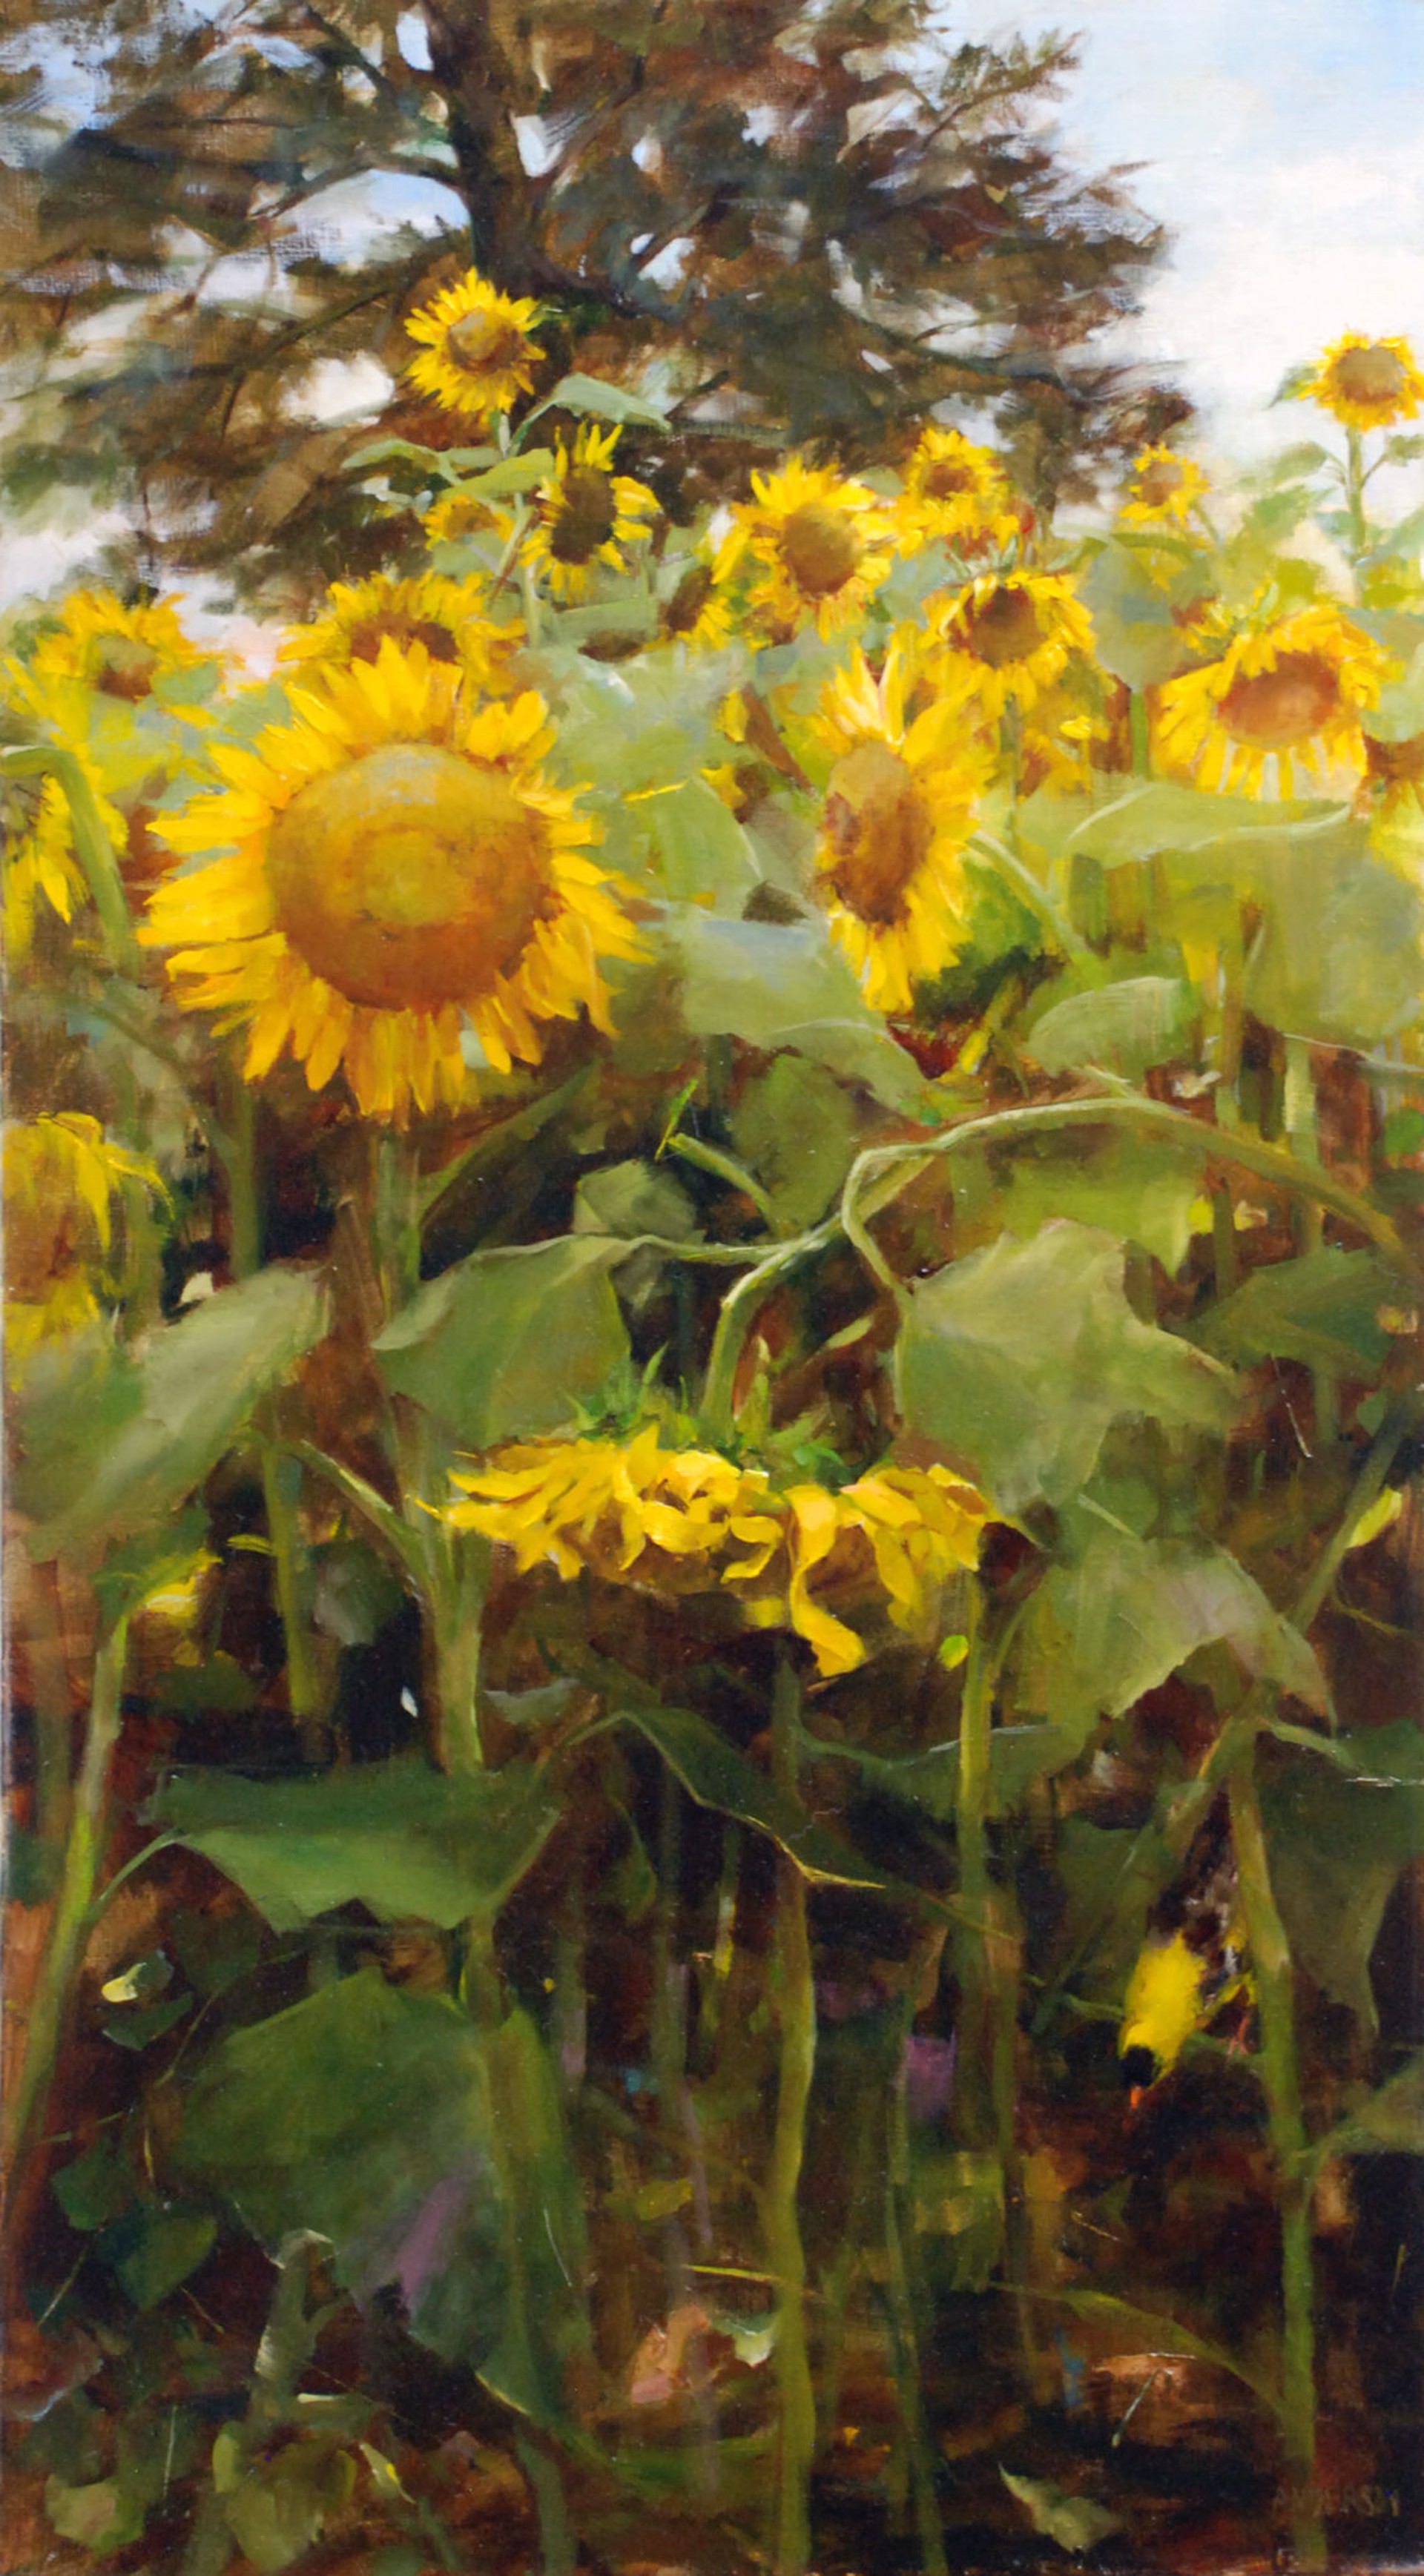 Sunflowers and Golden Finch by Kathy Anderson